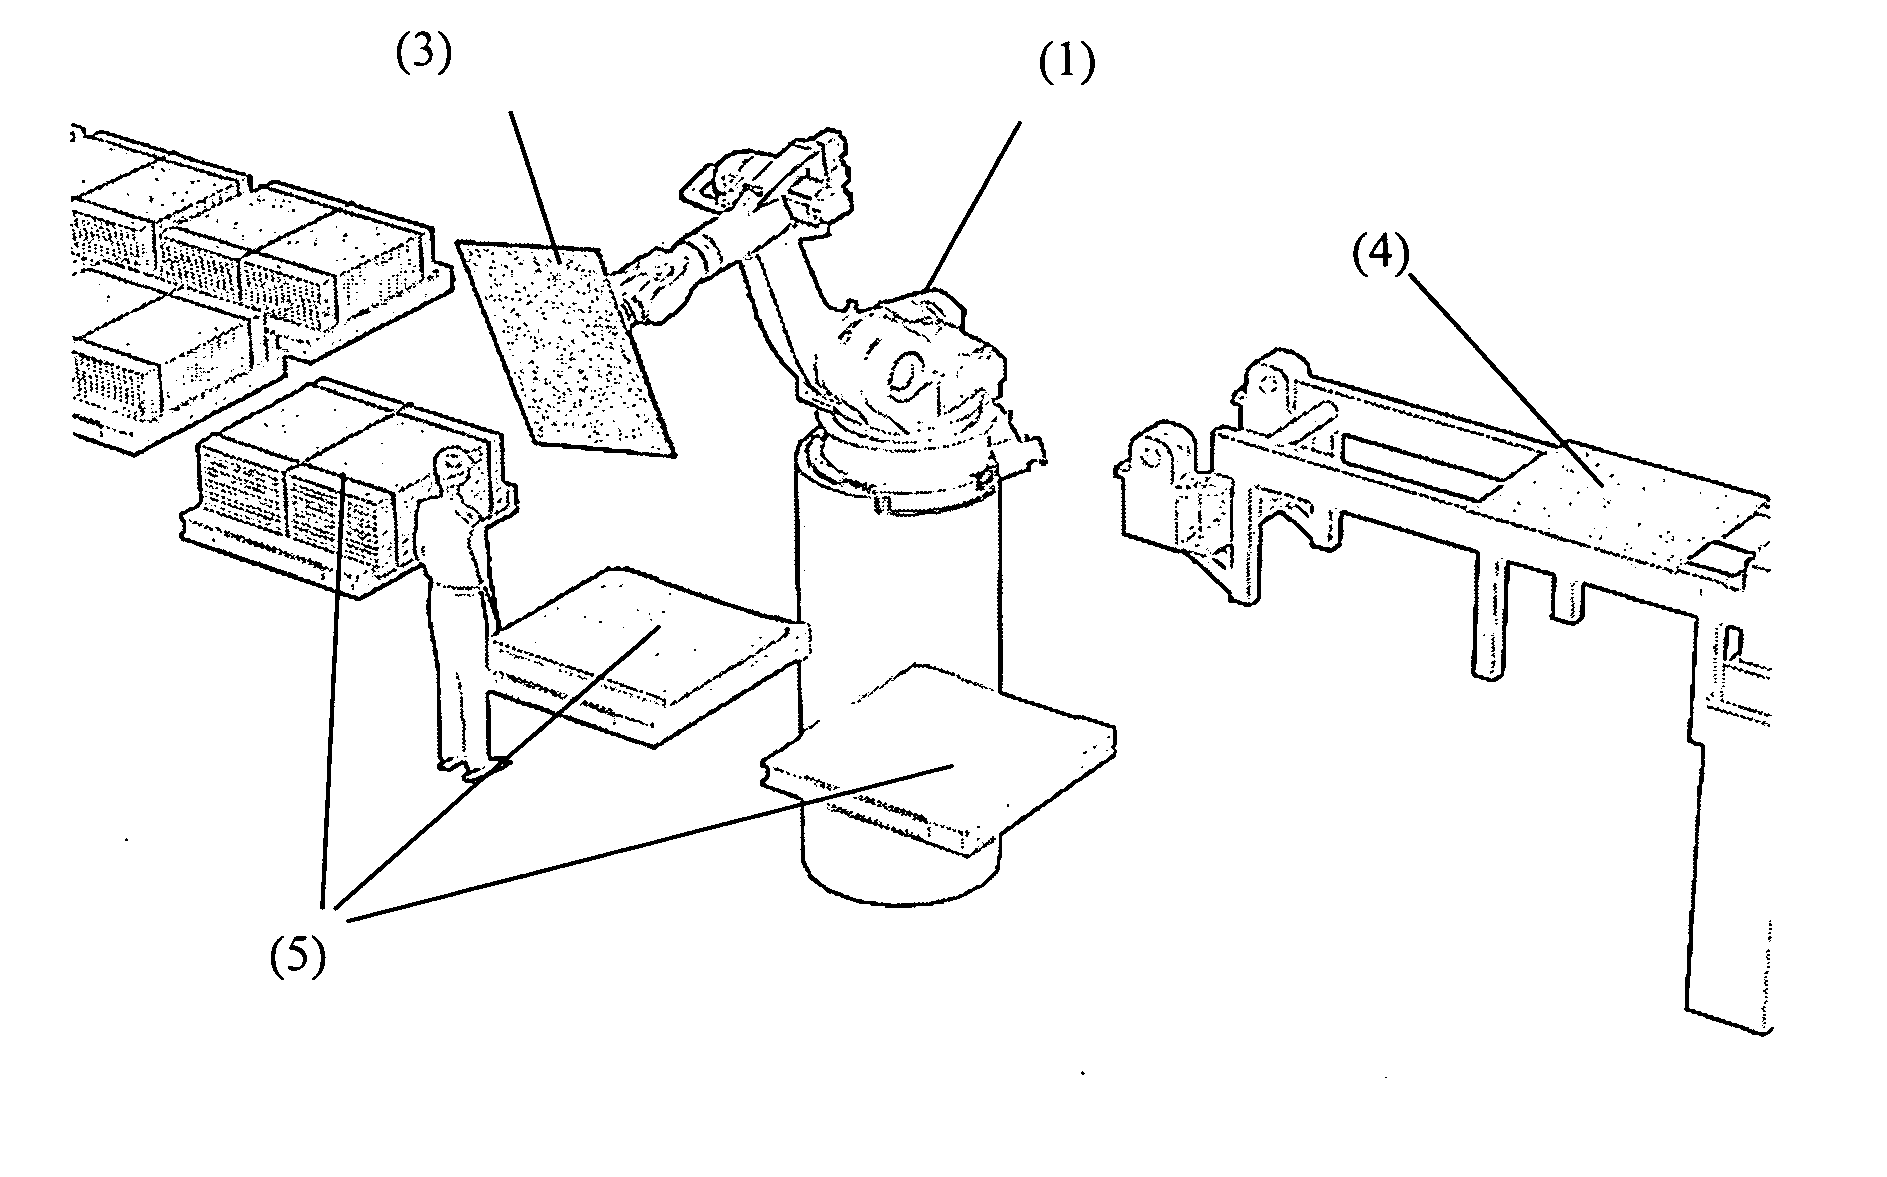 Robot system and method for cathode selection and handling procedures after the harvest